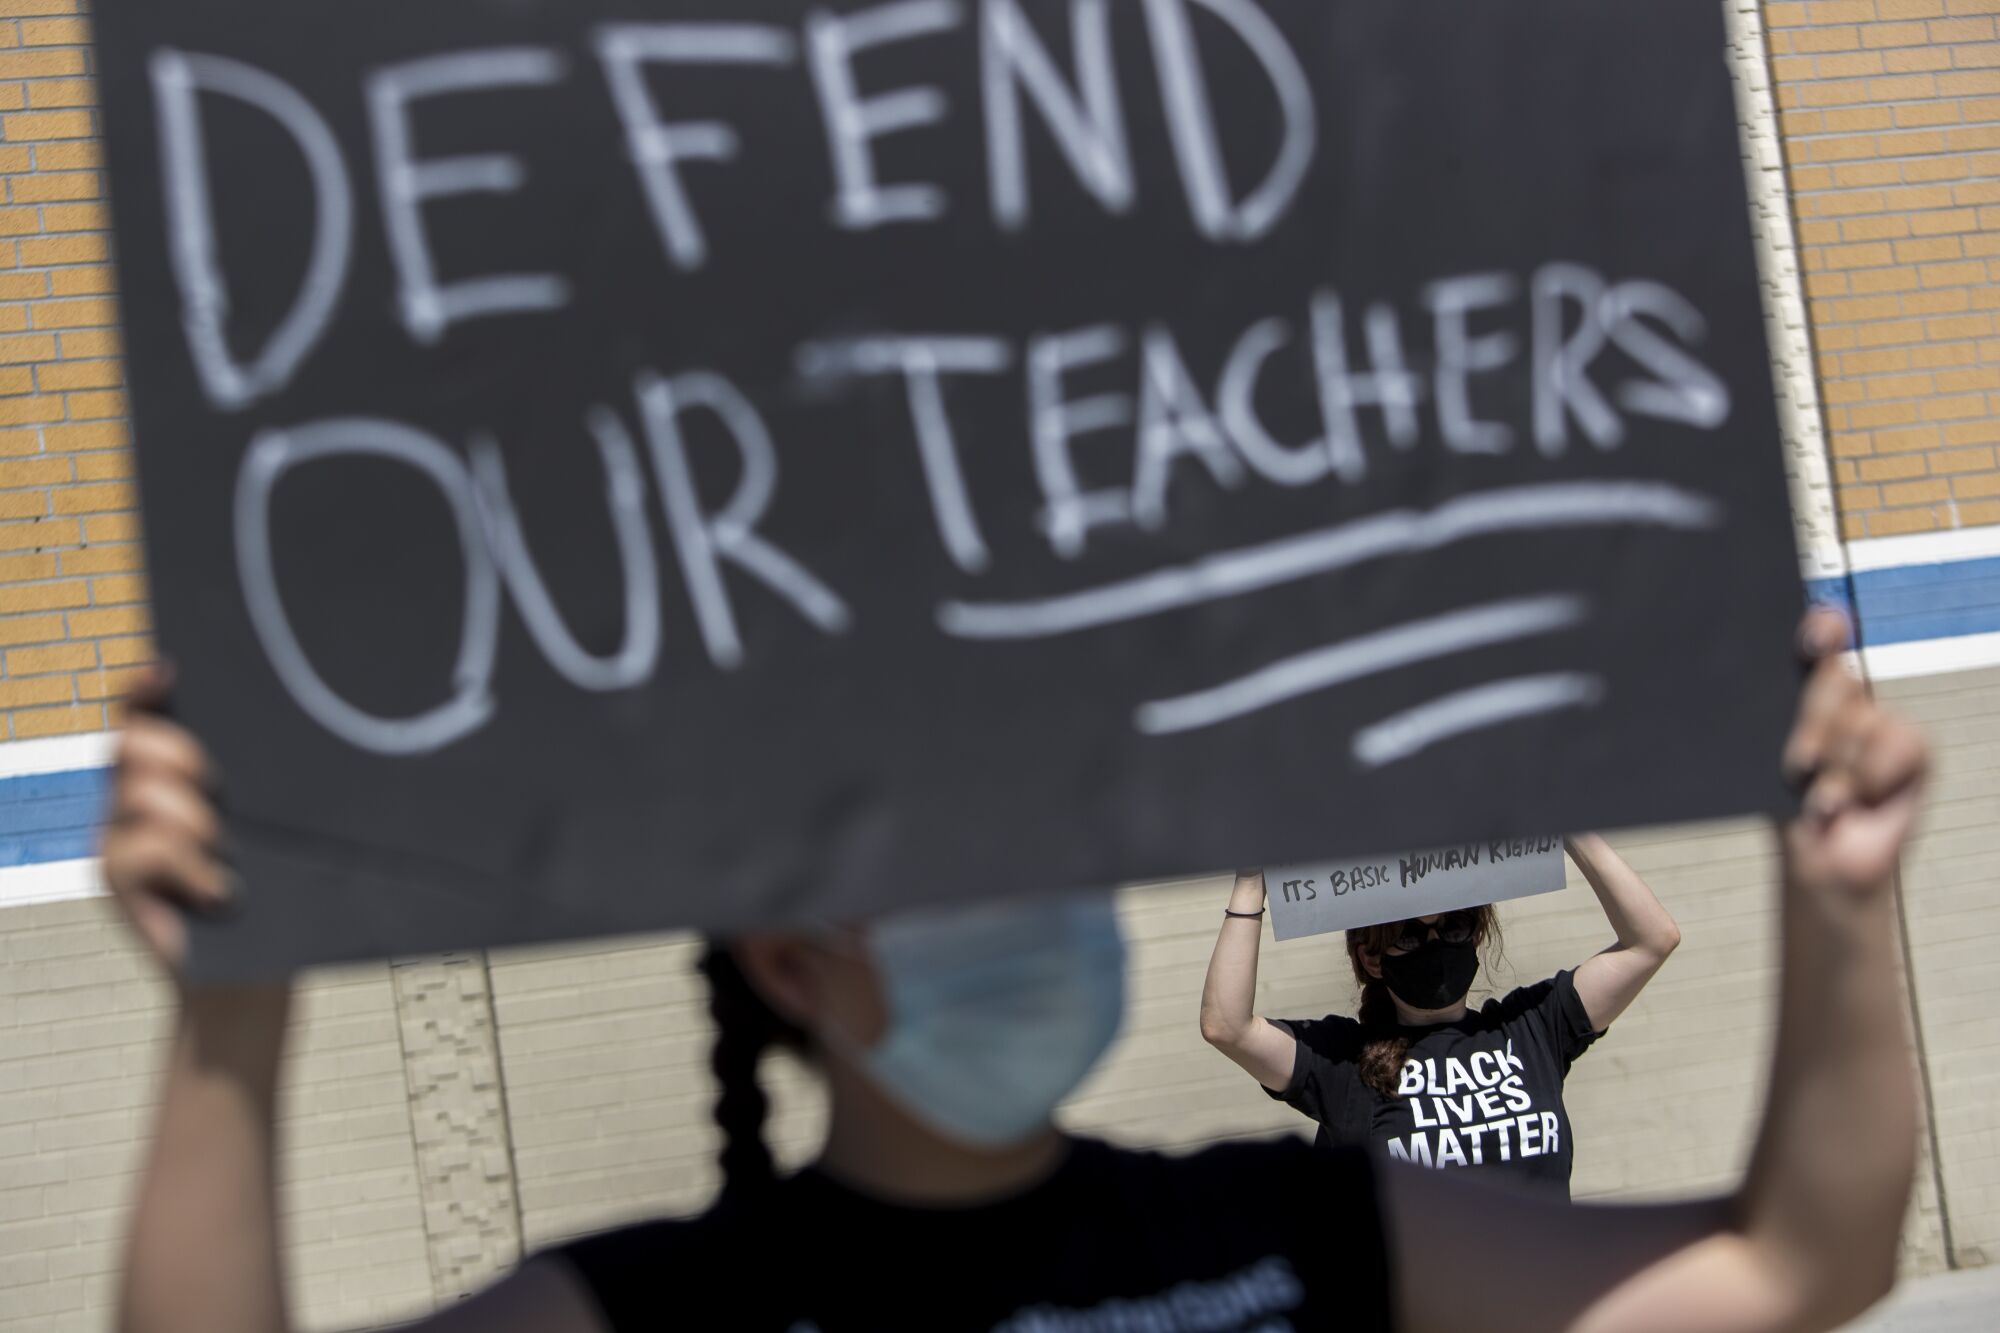 A student holds a sign that says "Defend our teachers" at a protest supporting a teacher who wore an "I can't breathe" shirt